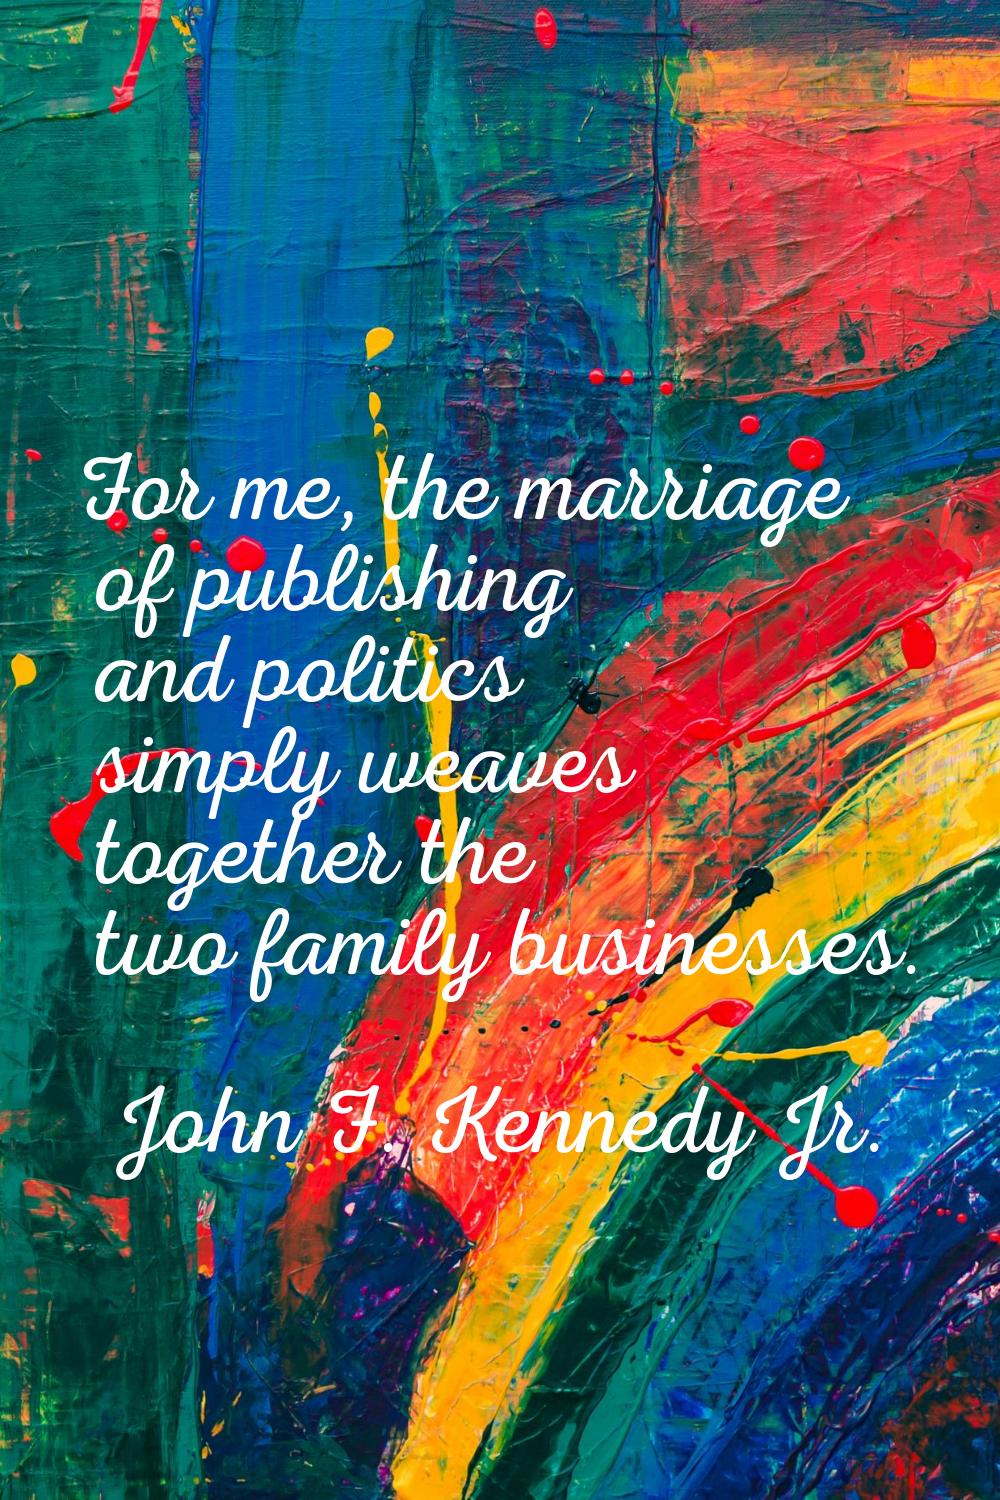 For me, the marriage of publishing and politics simply weaves together the two family businesses.